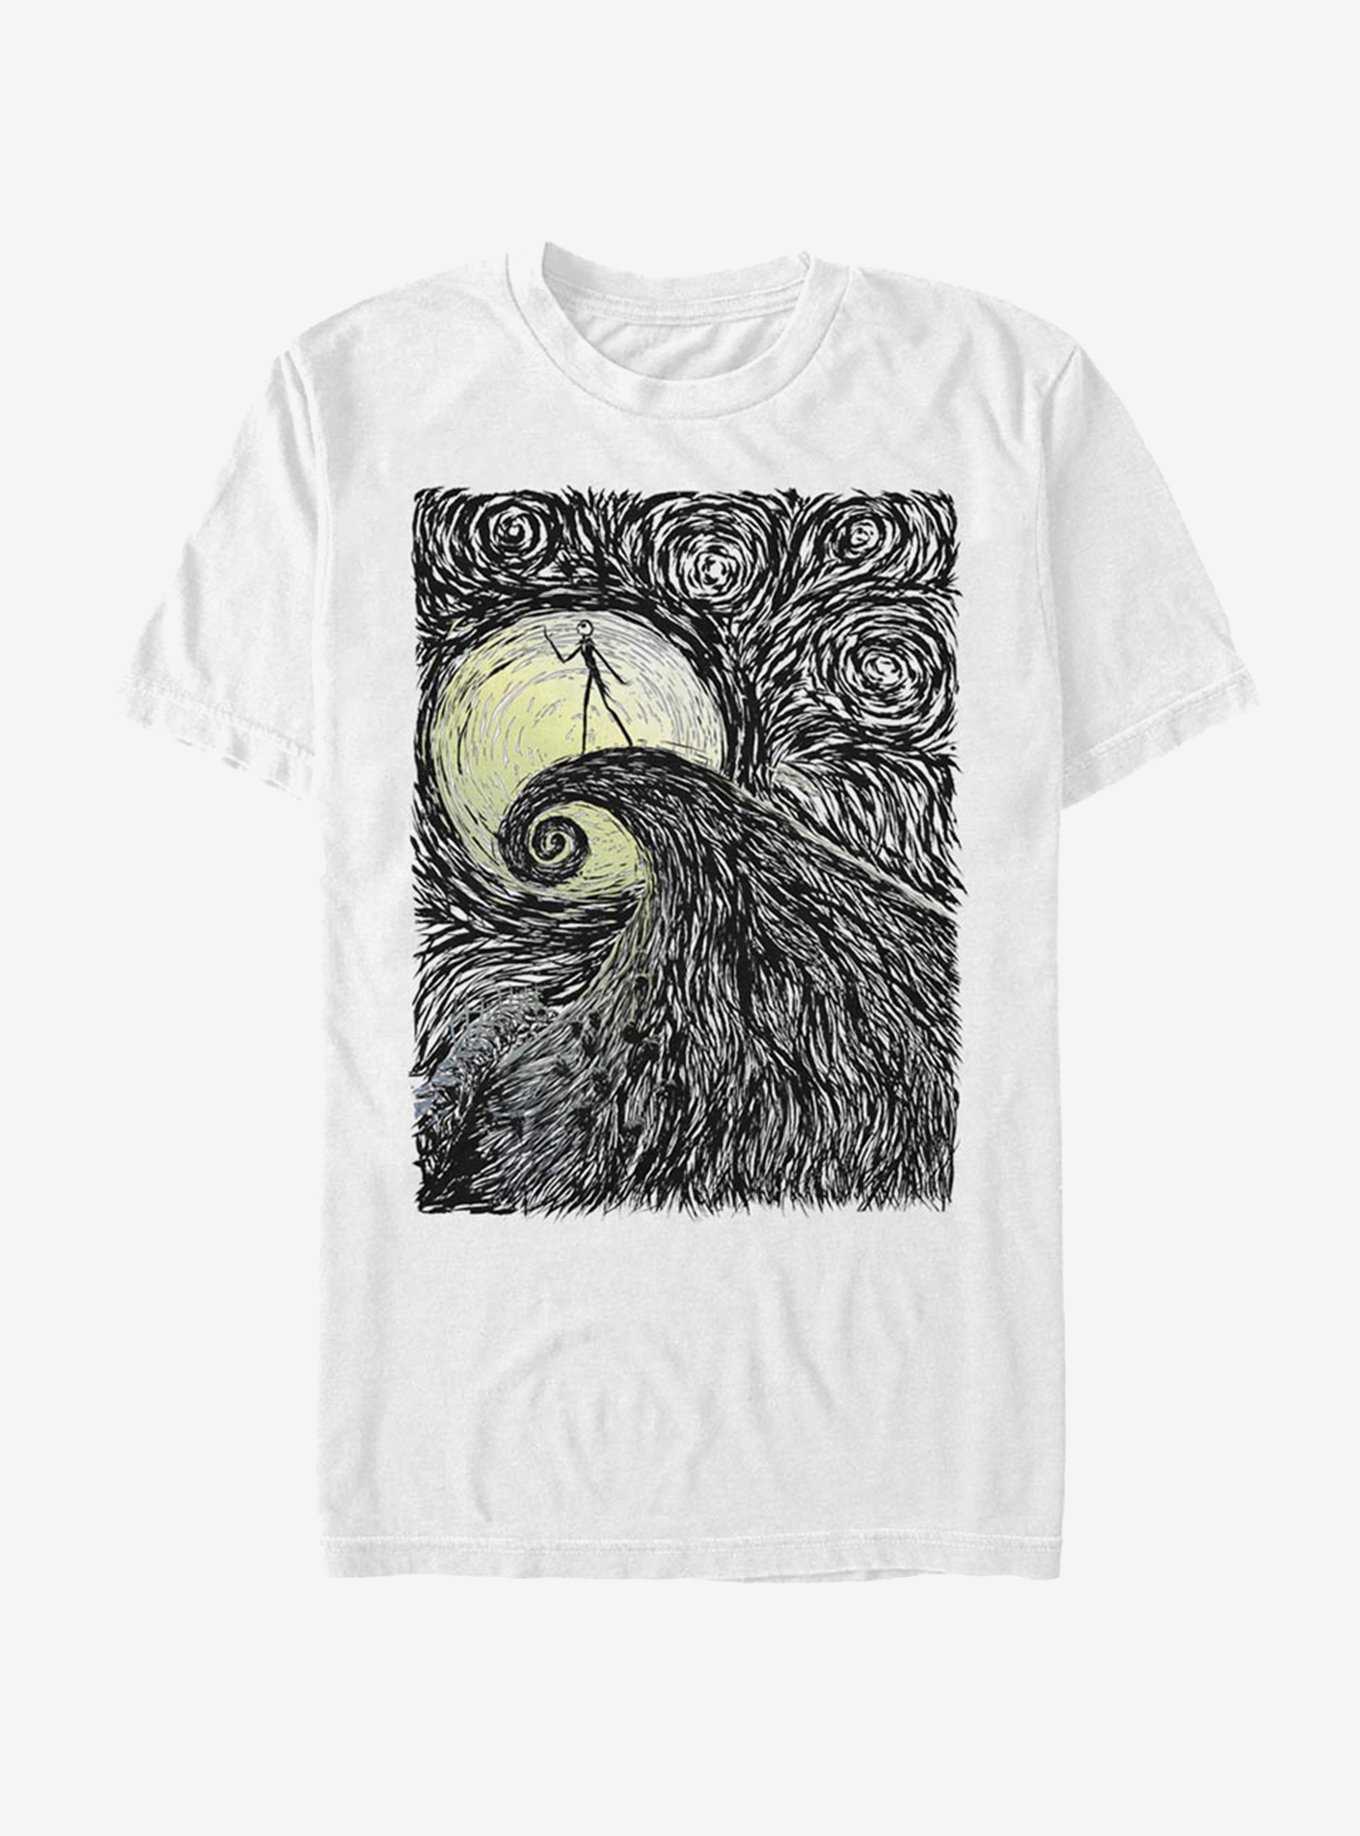 Disney The Nightmare Before Christmas Spiral Hill T-Shirt, , hi-res